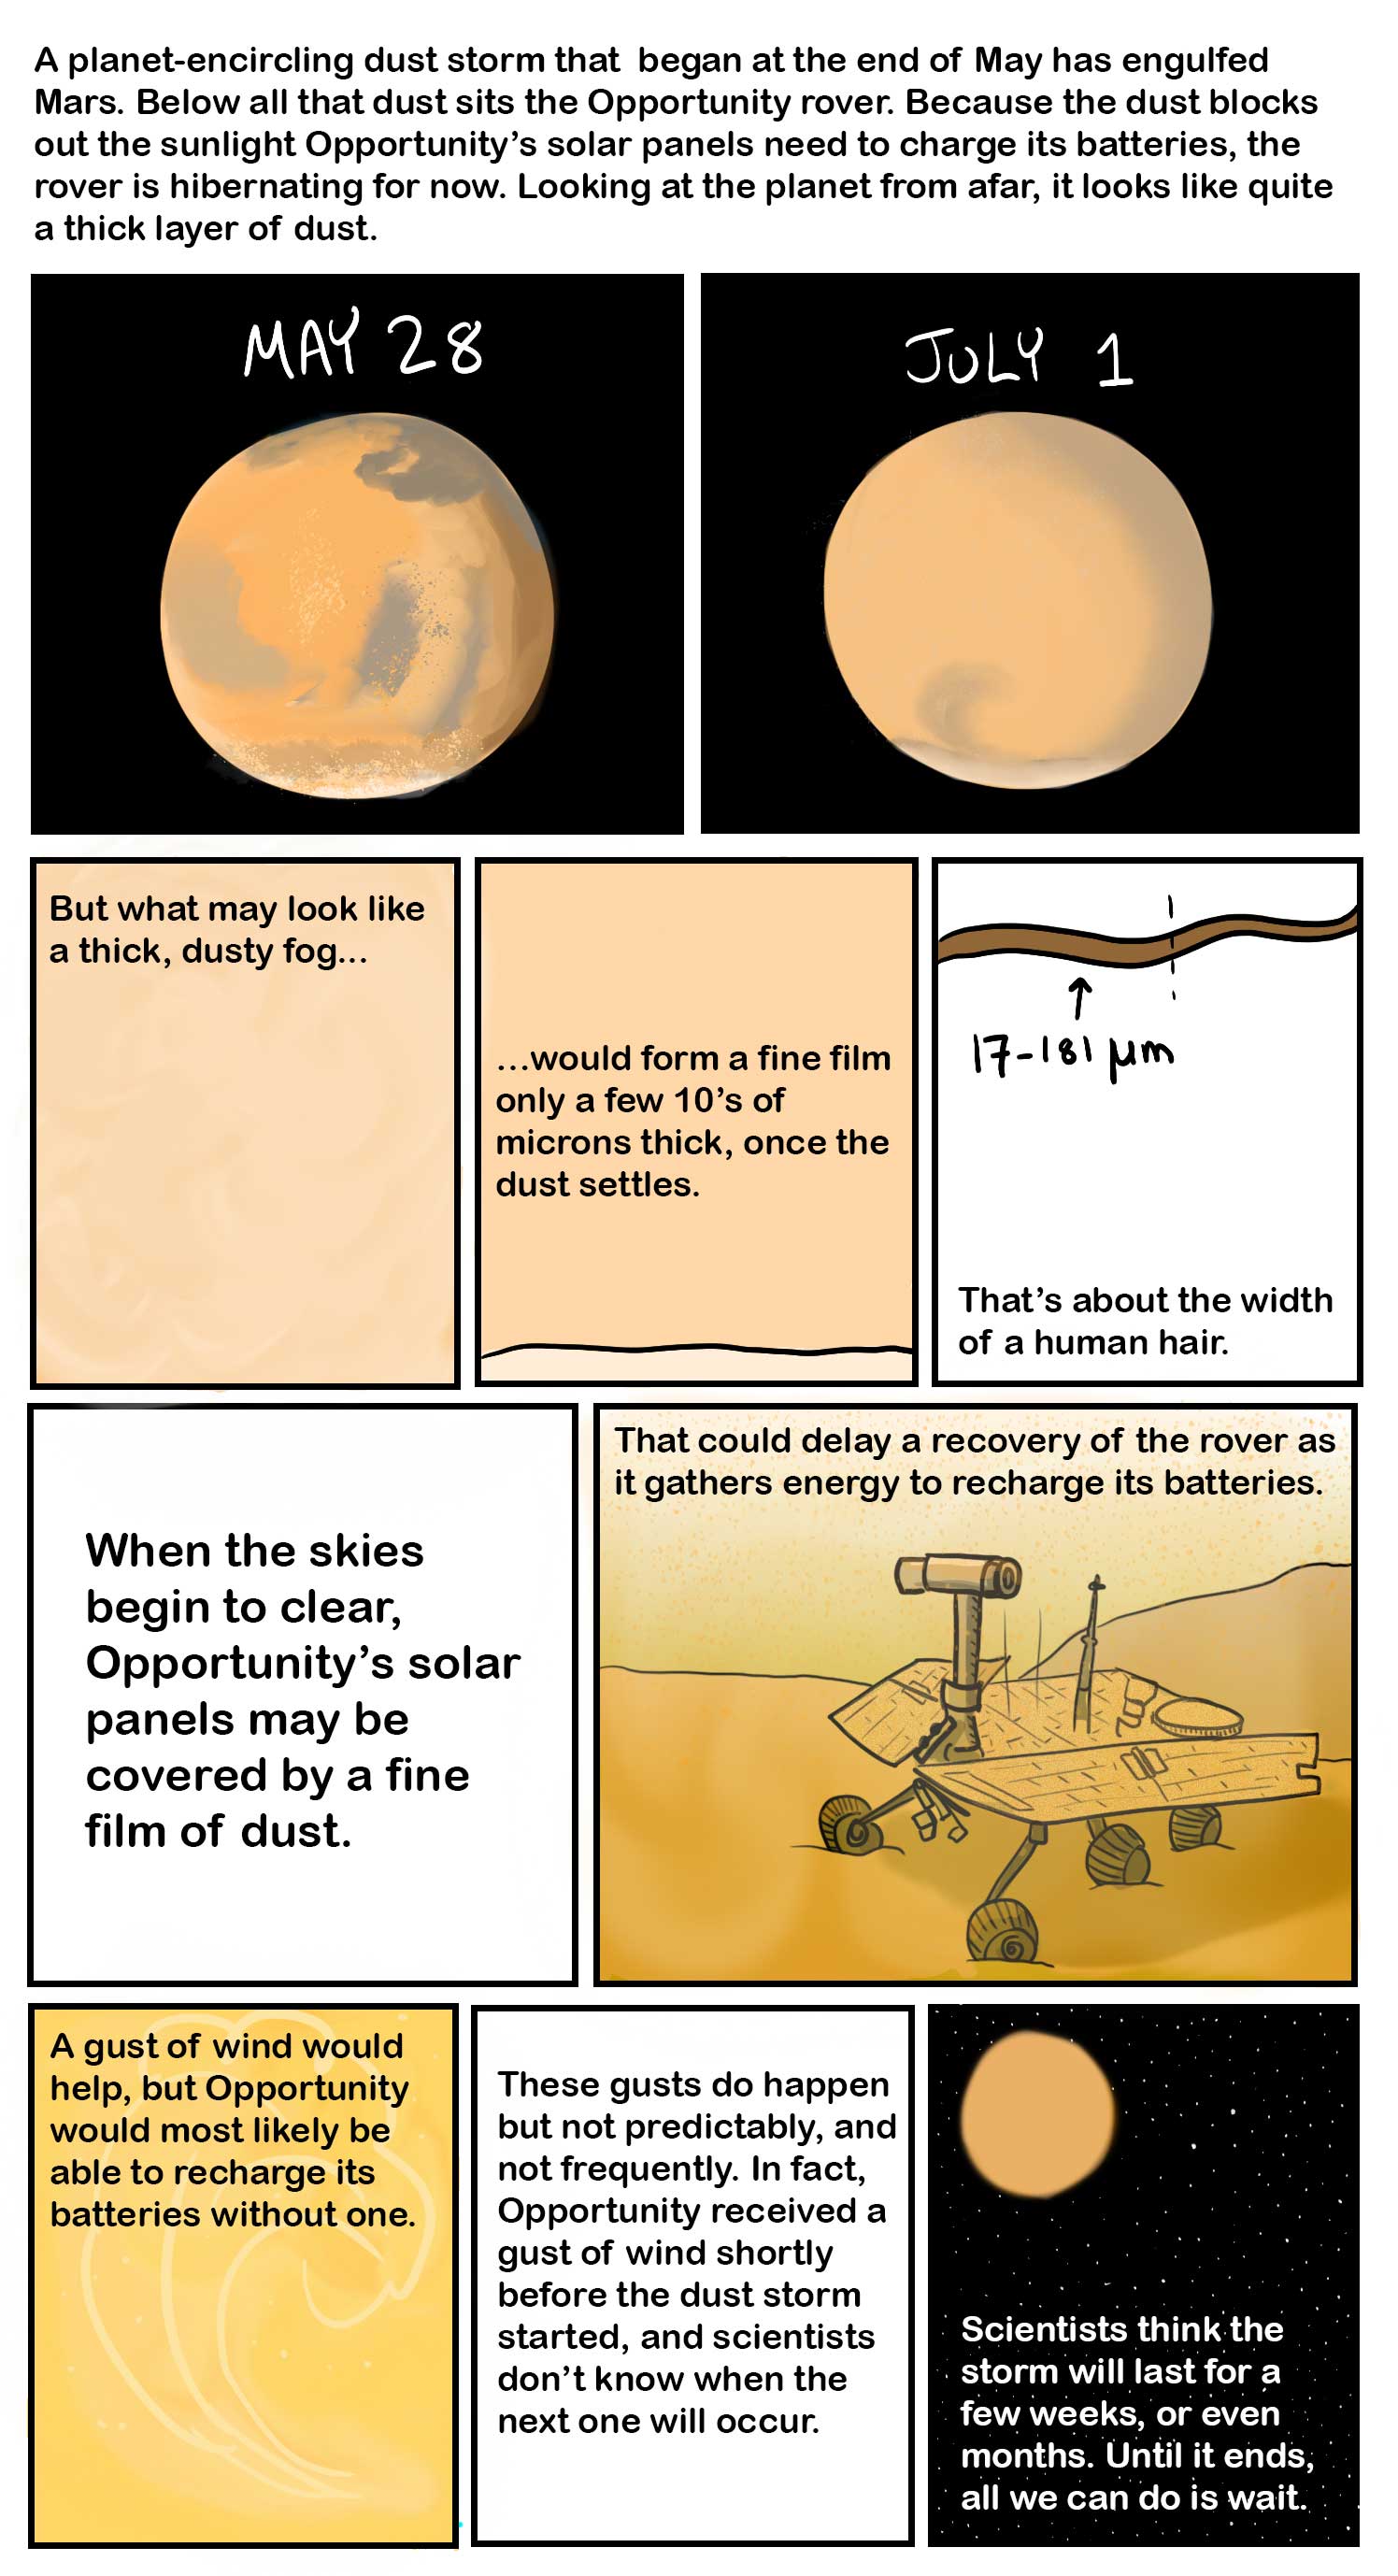 Illustrated story about dust impact on Mars rover.